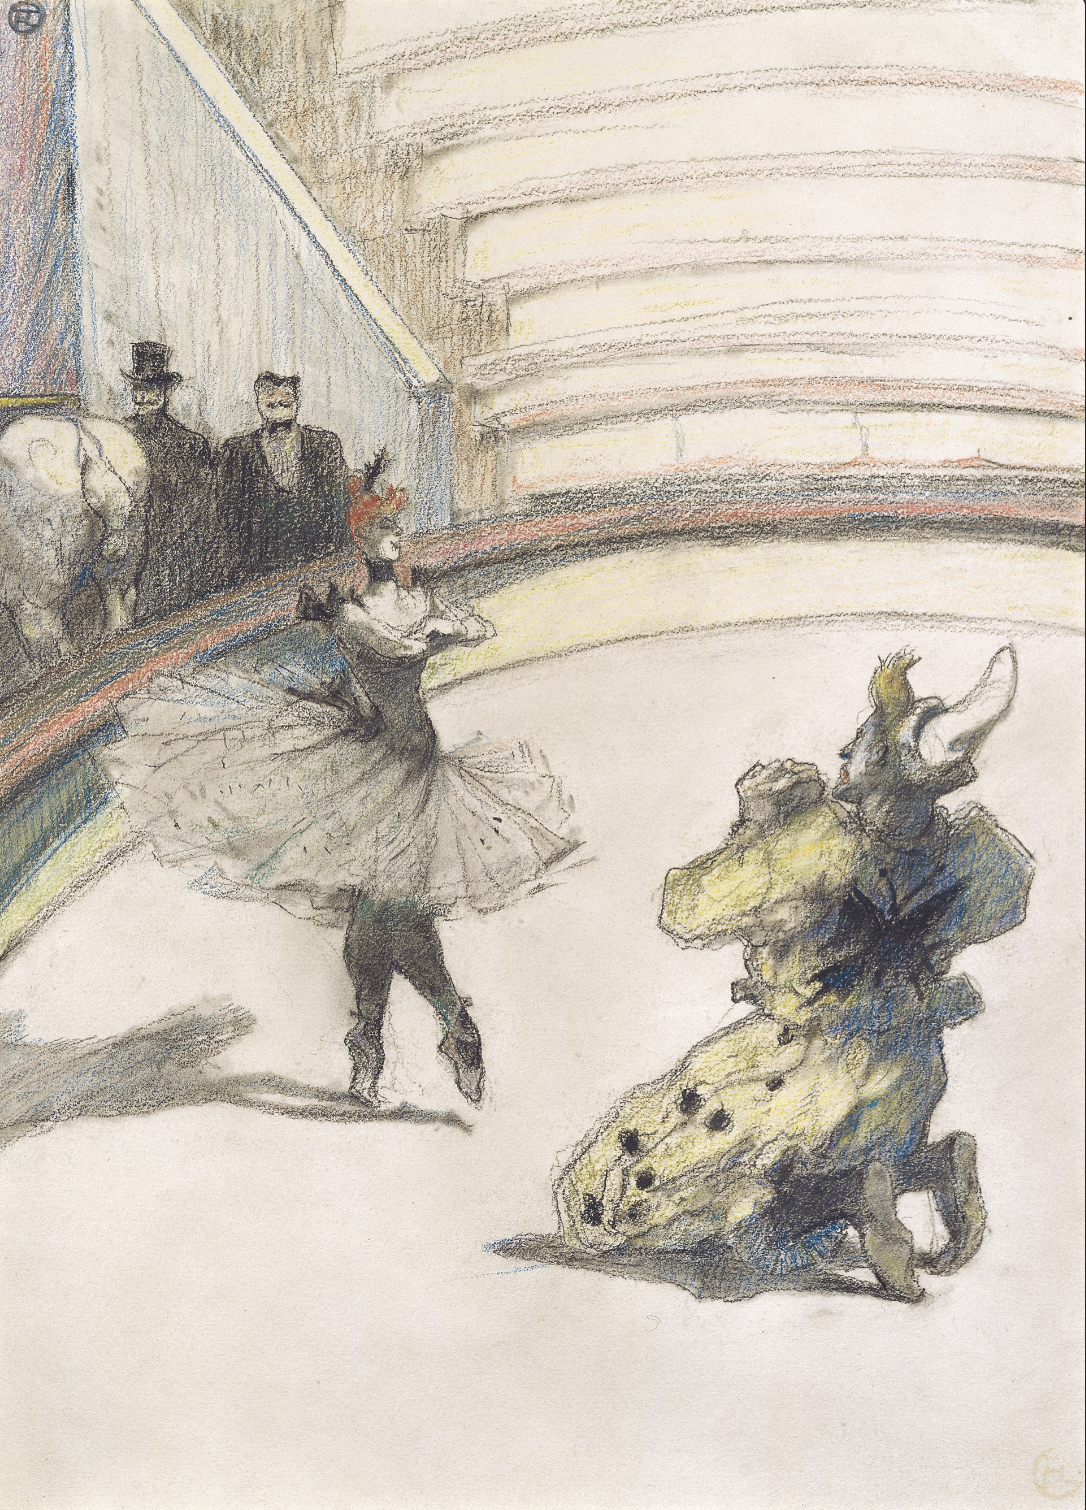 The Wick - Henri de Toulouse-Lautrec, At the Circus: The Encore, 1899. Black and coloured chalks on paper, 35.5 x 25 cm. Collection of David Lachenmann